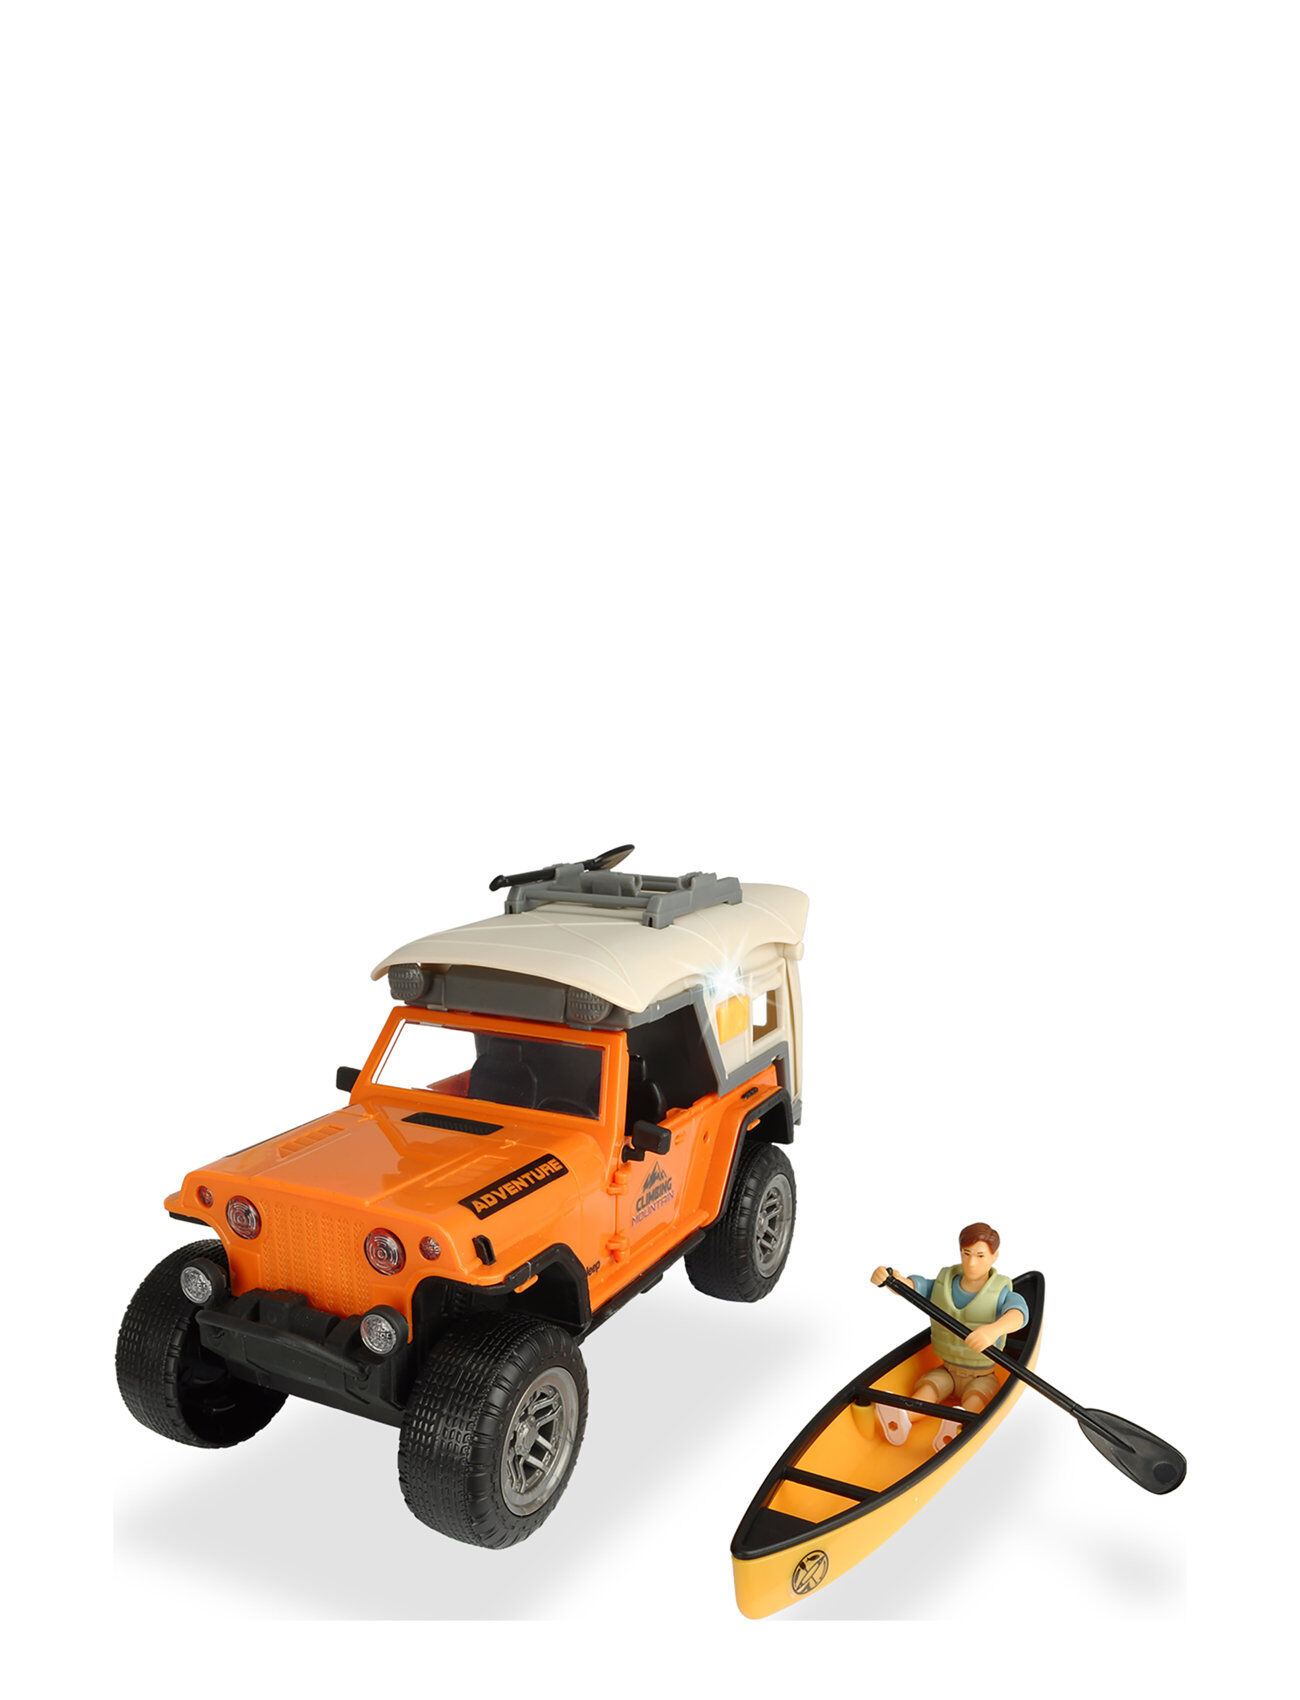 Dickie Toys Camping Set Toys Toy Cars & Vehicles Toy Cars Oransje Dickie Toys